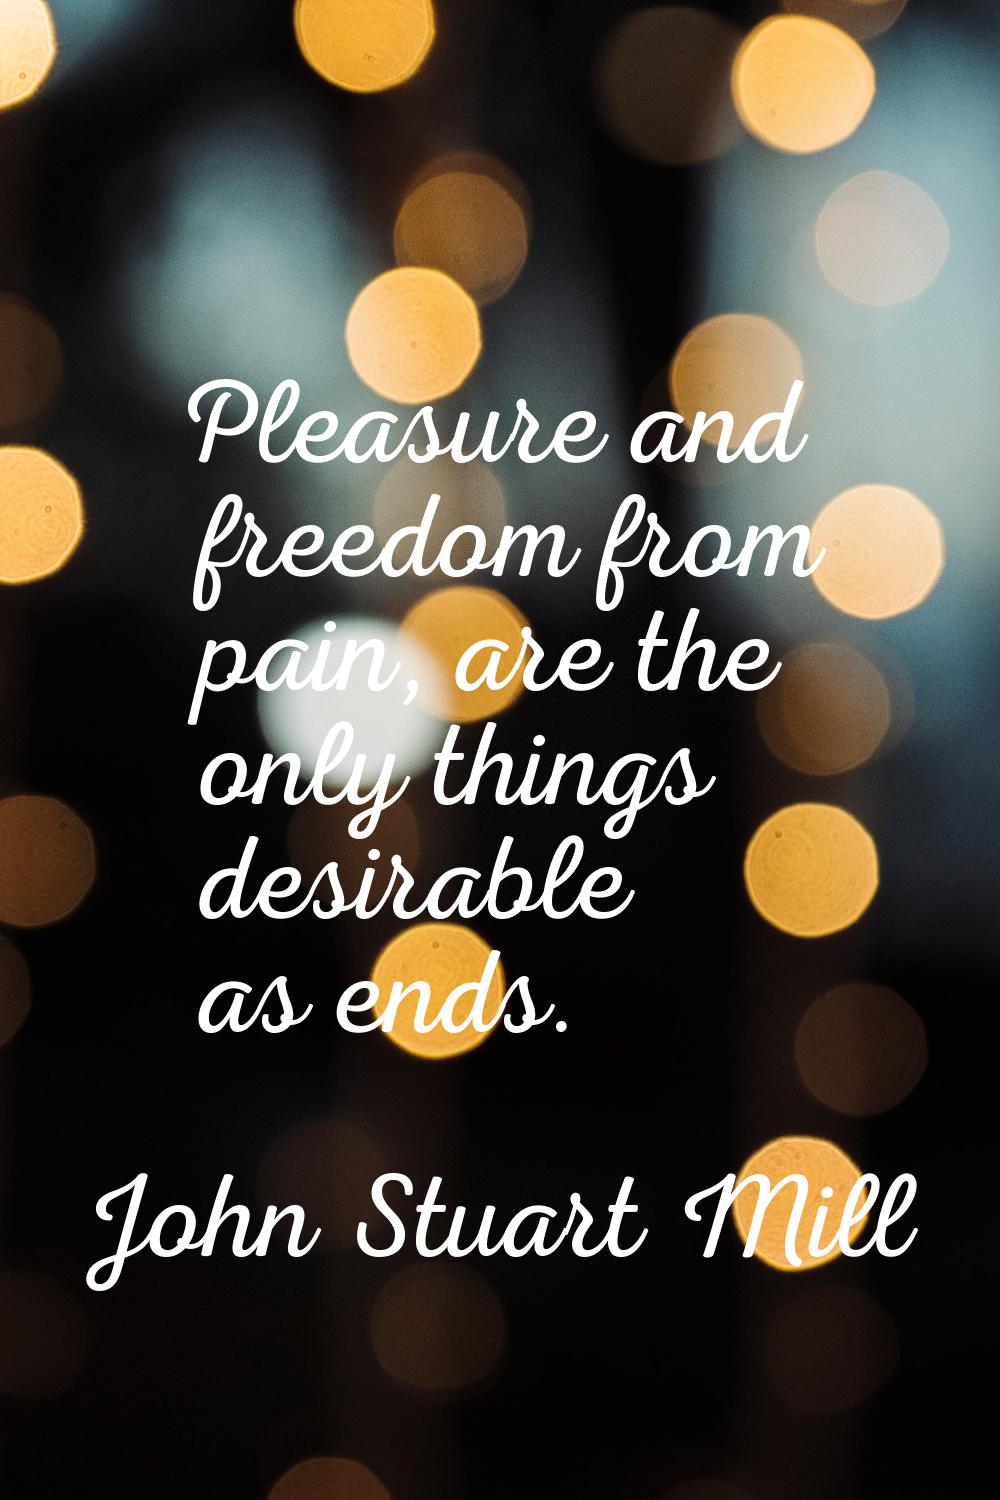 Pleasure and freedom from pain, are the only things desirable as ends.